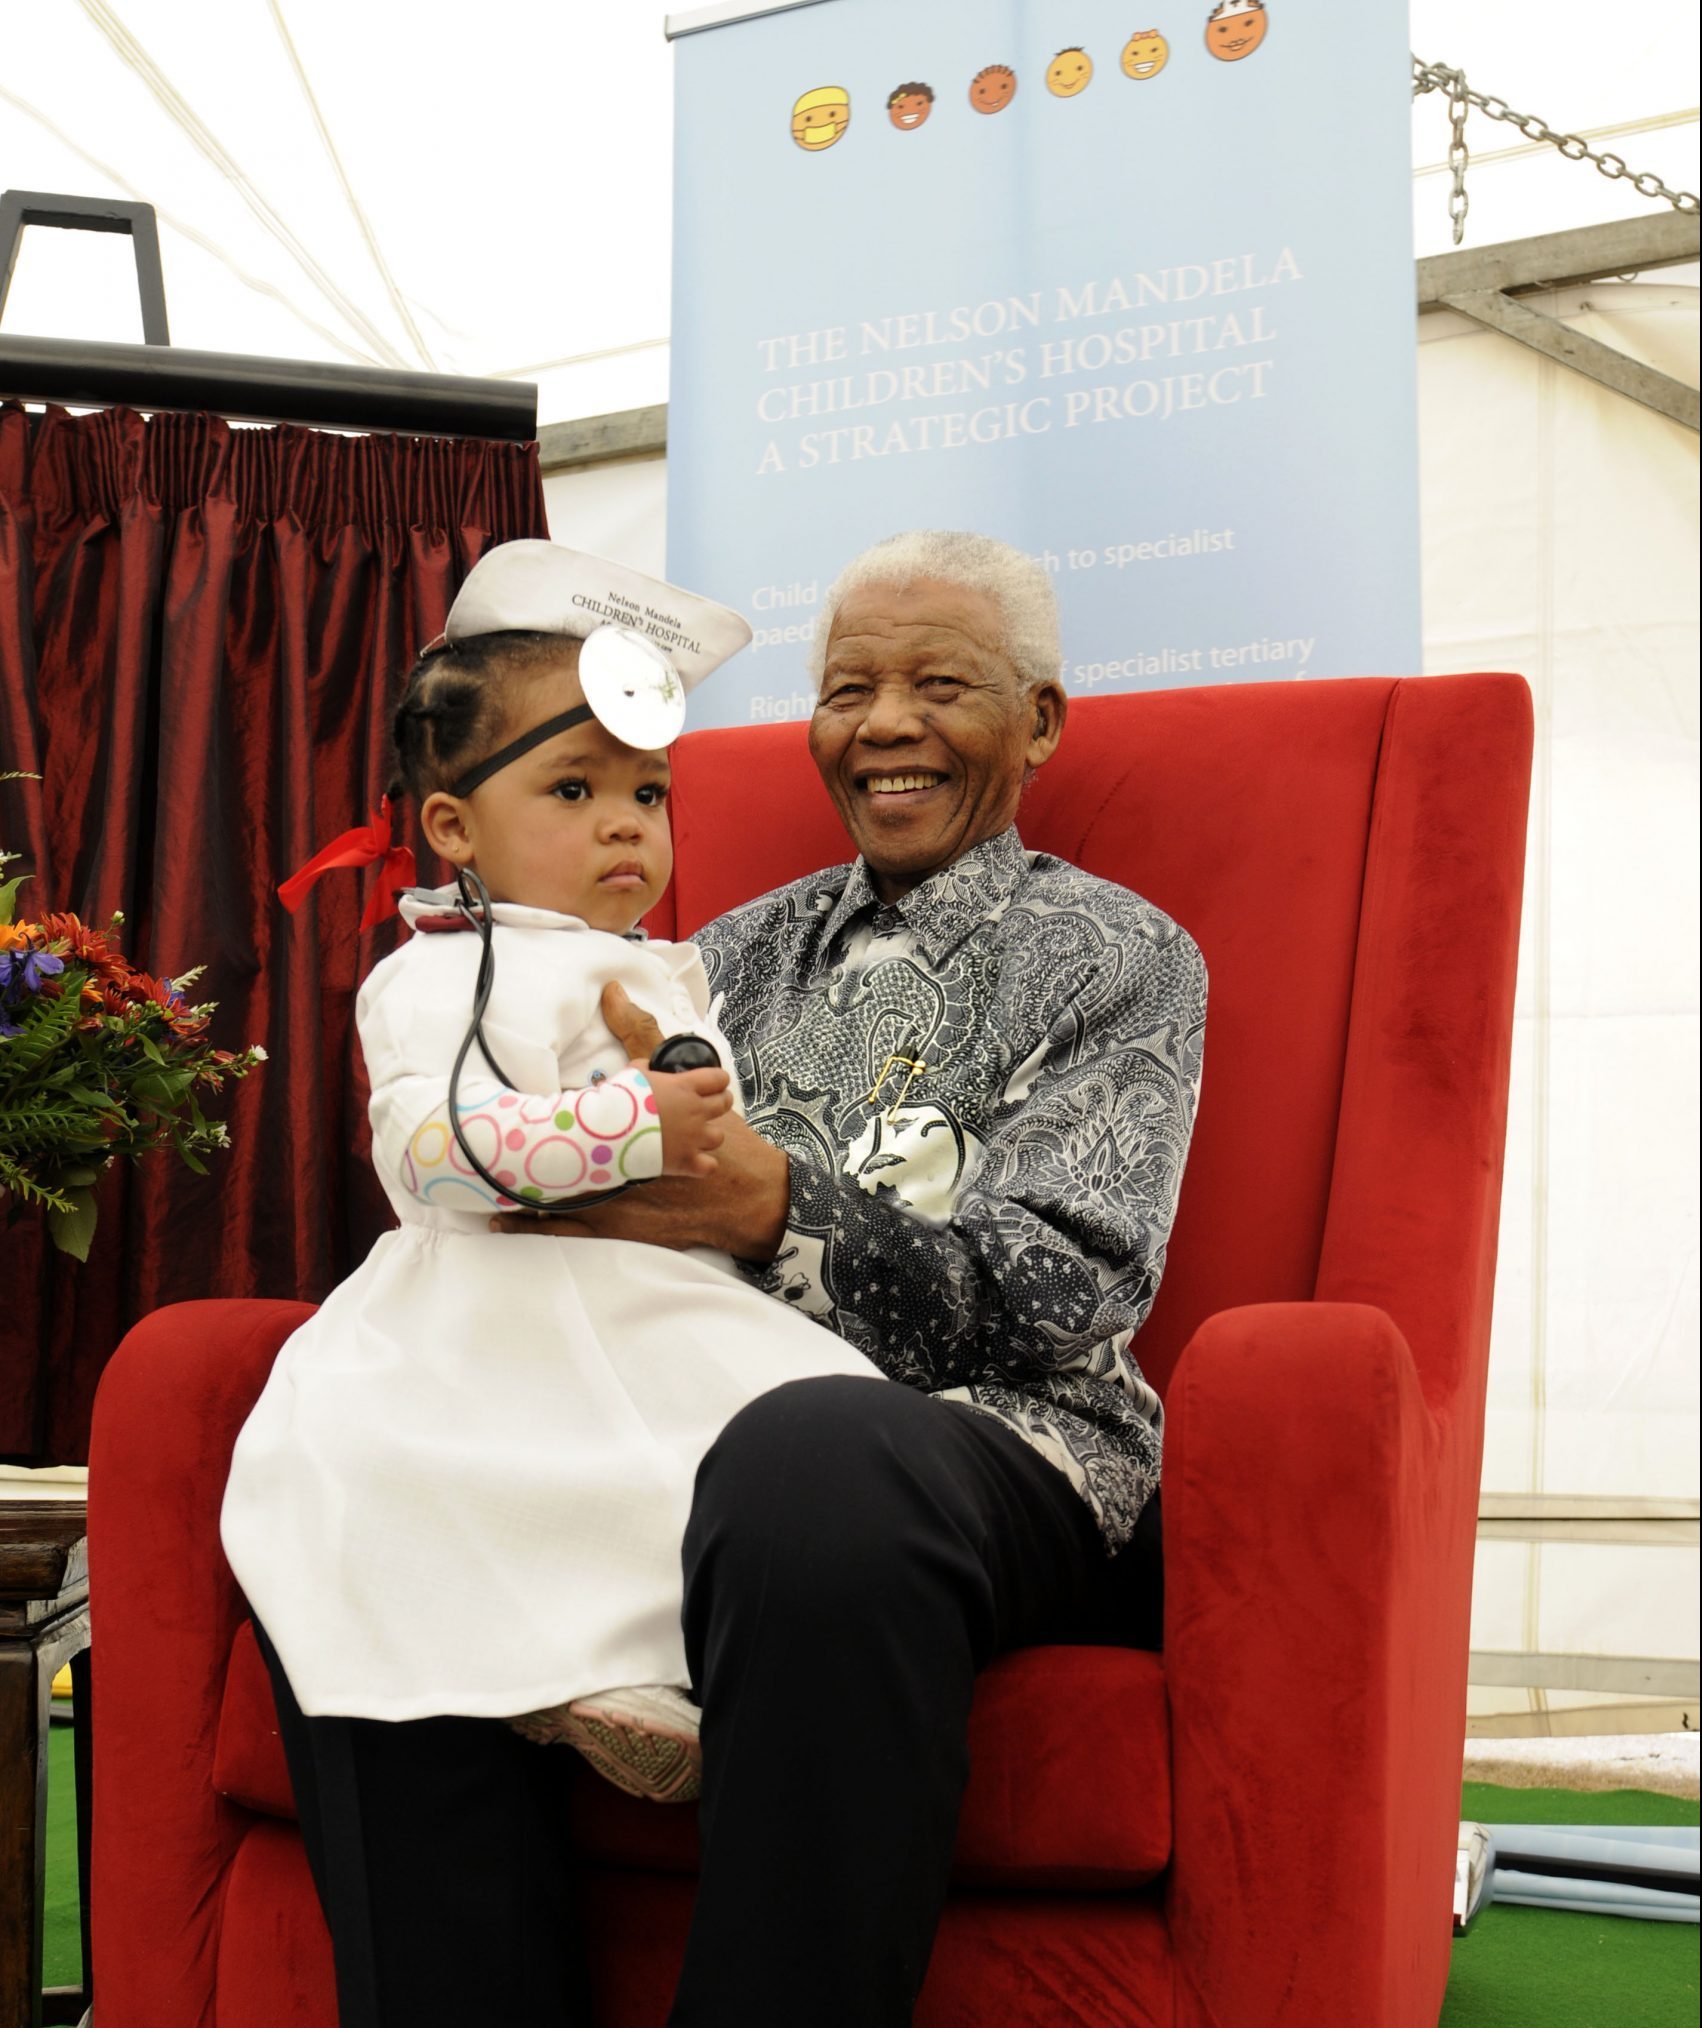 Medical treatment for children in South Africa, with the Nelson Mandela Children’s Hospital